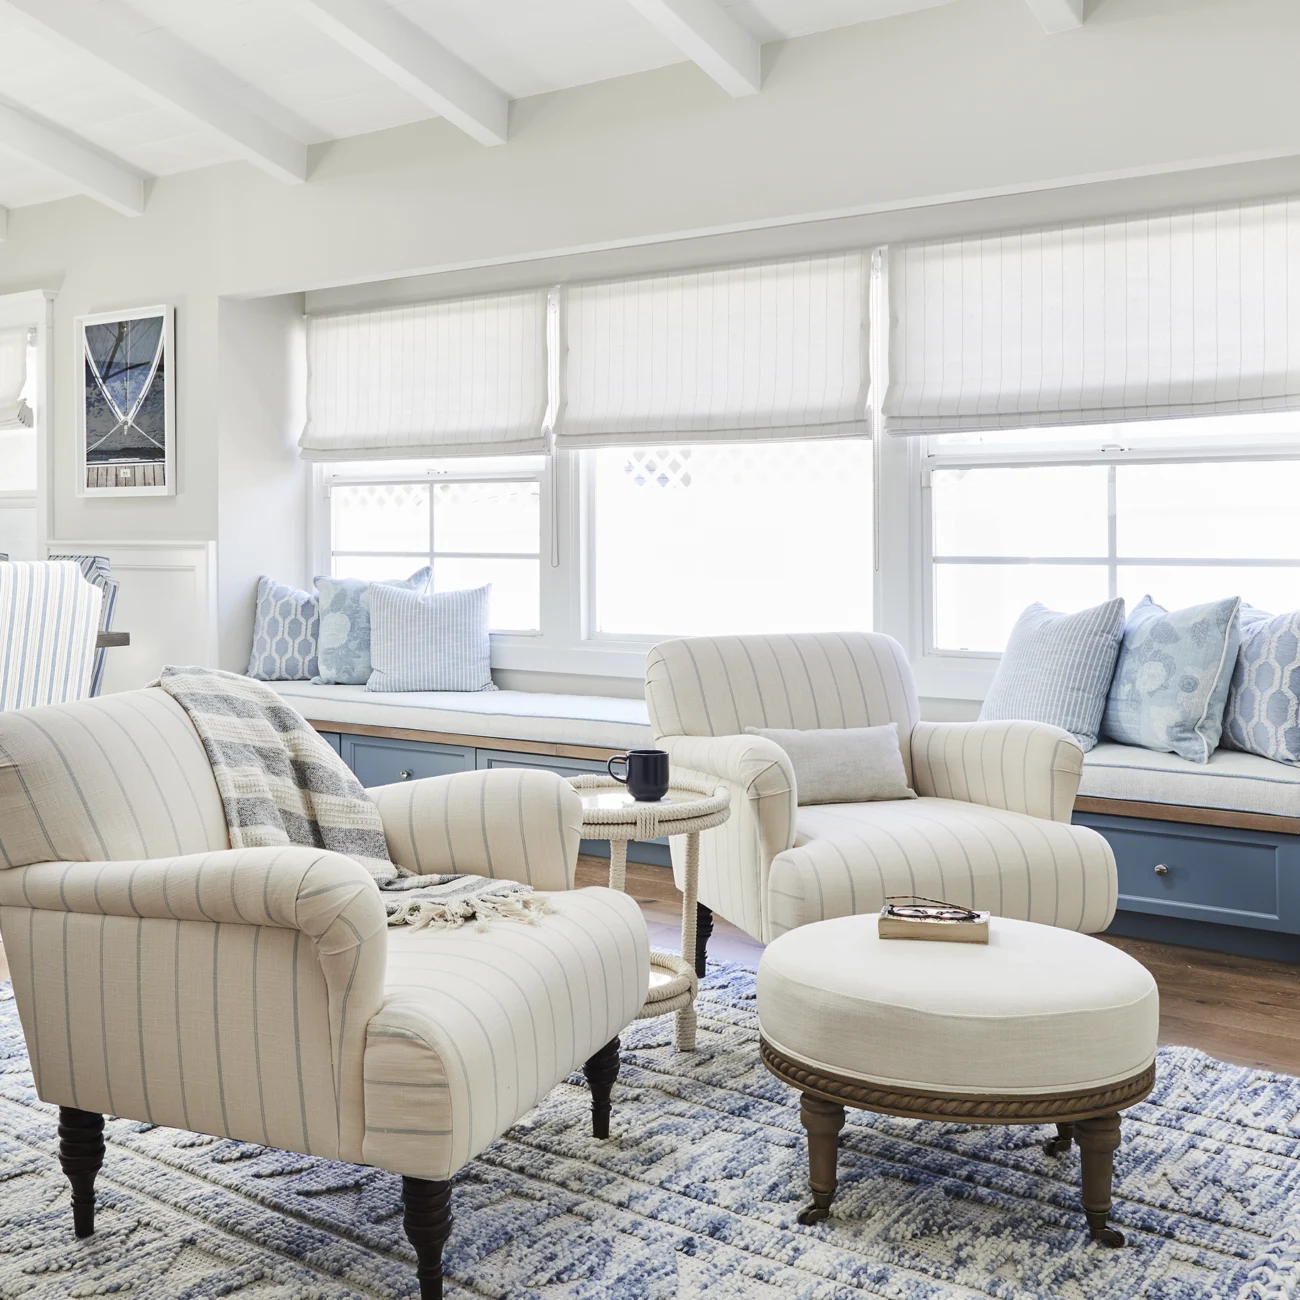 Christine Vroom Interiors | Flournoy | Costal White Living room and blue accents